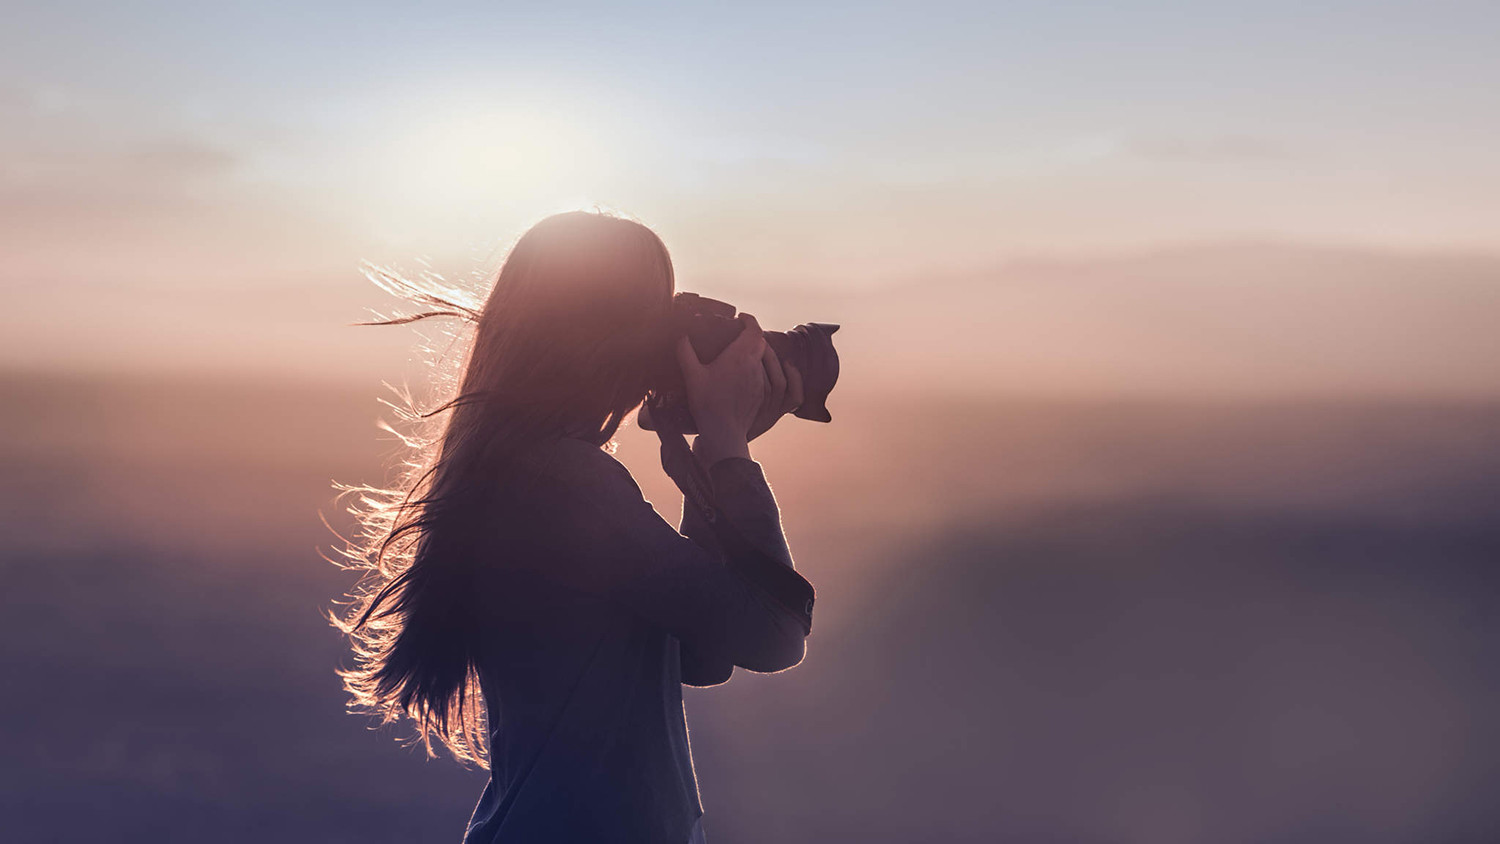 5 Secrets Every Photographer Should Learn - 500px